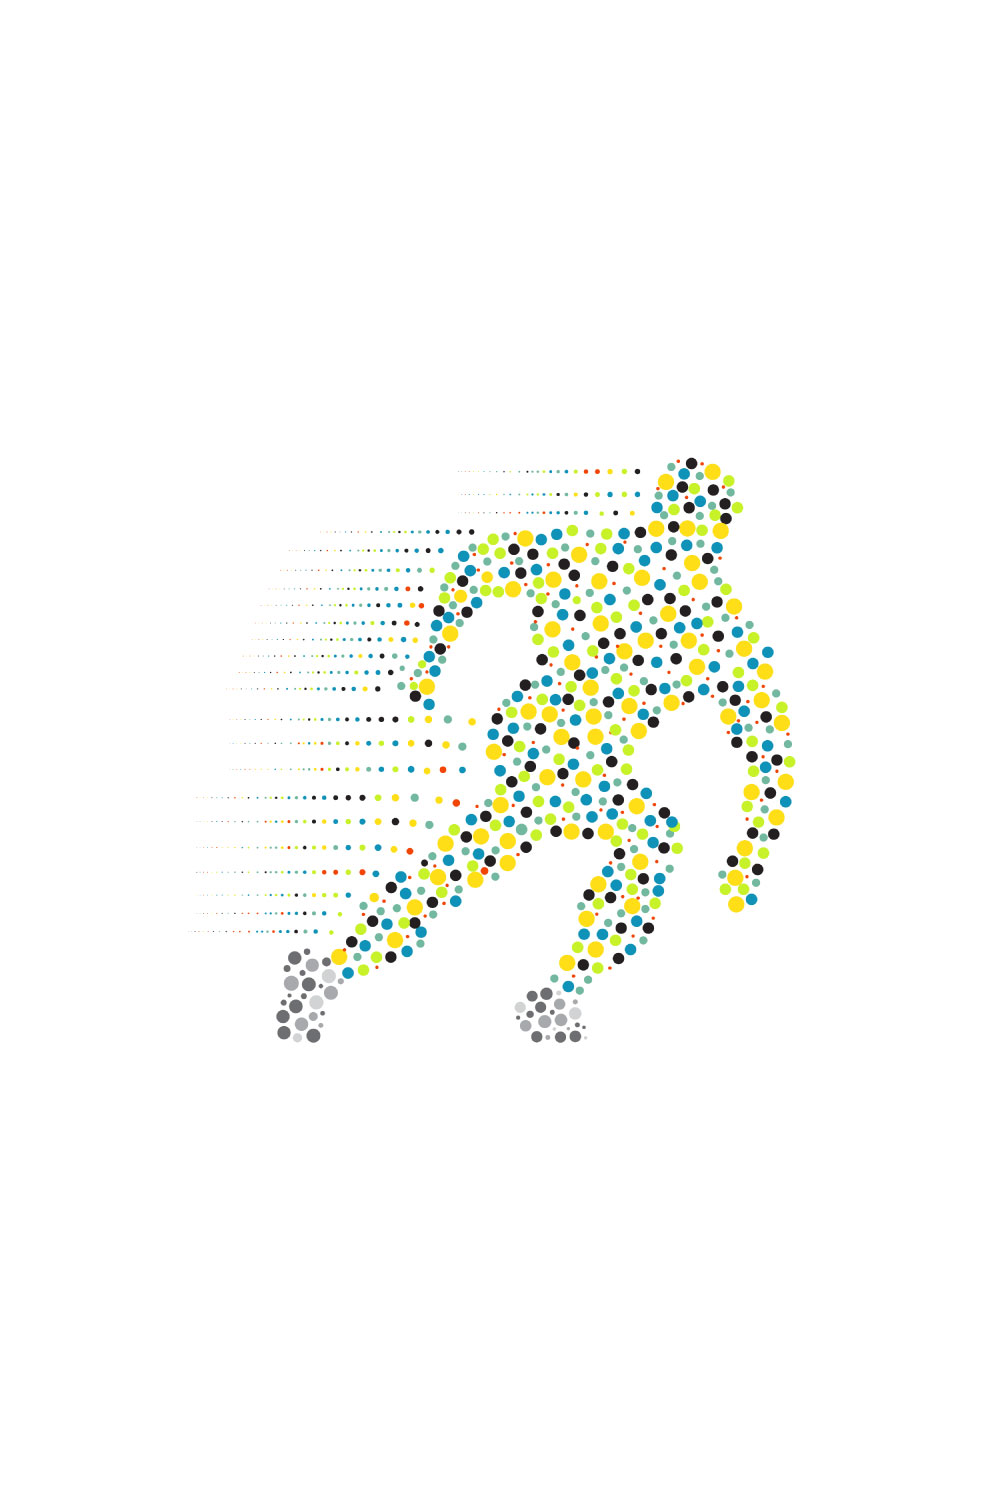 Speedy person composed of colored dots, vector illustration pinterest preview image.